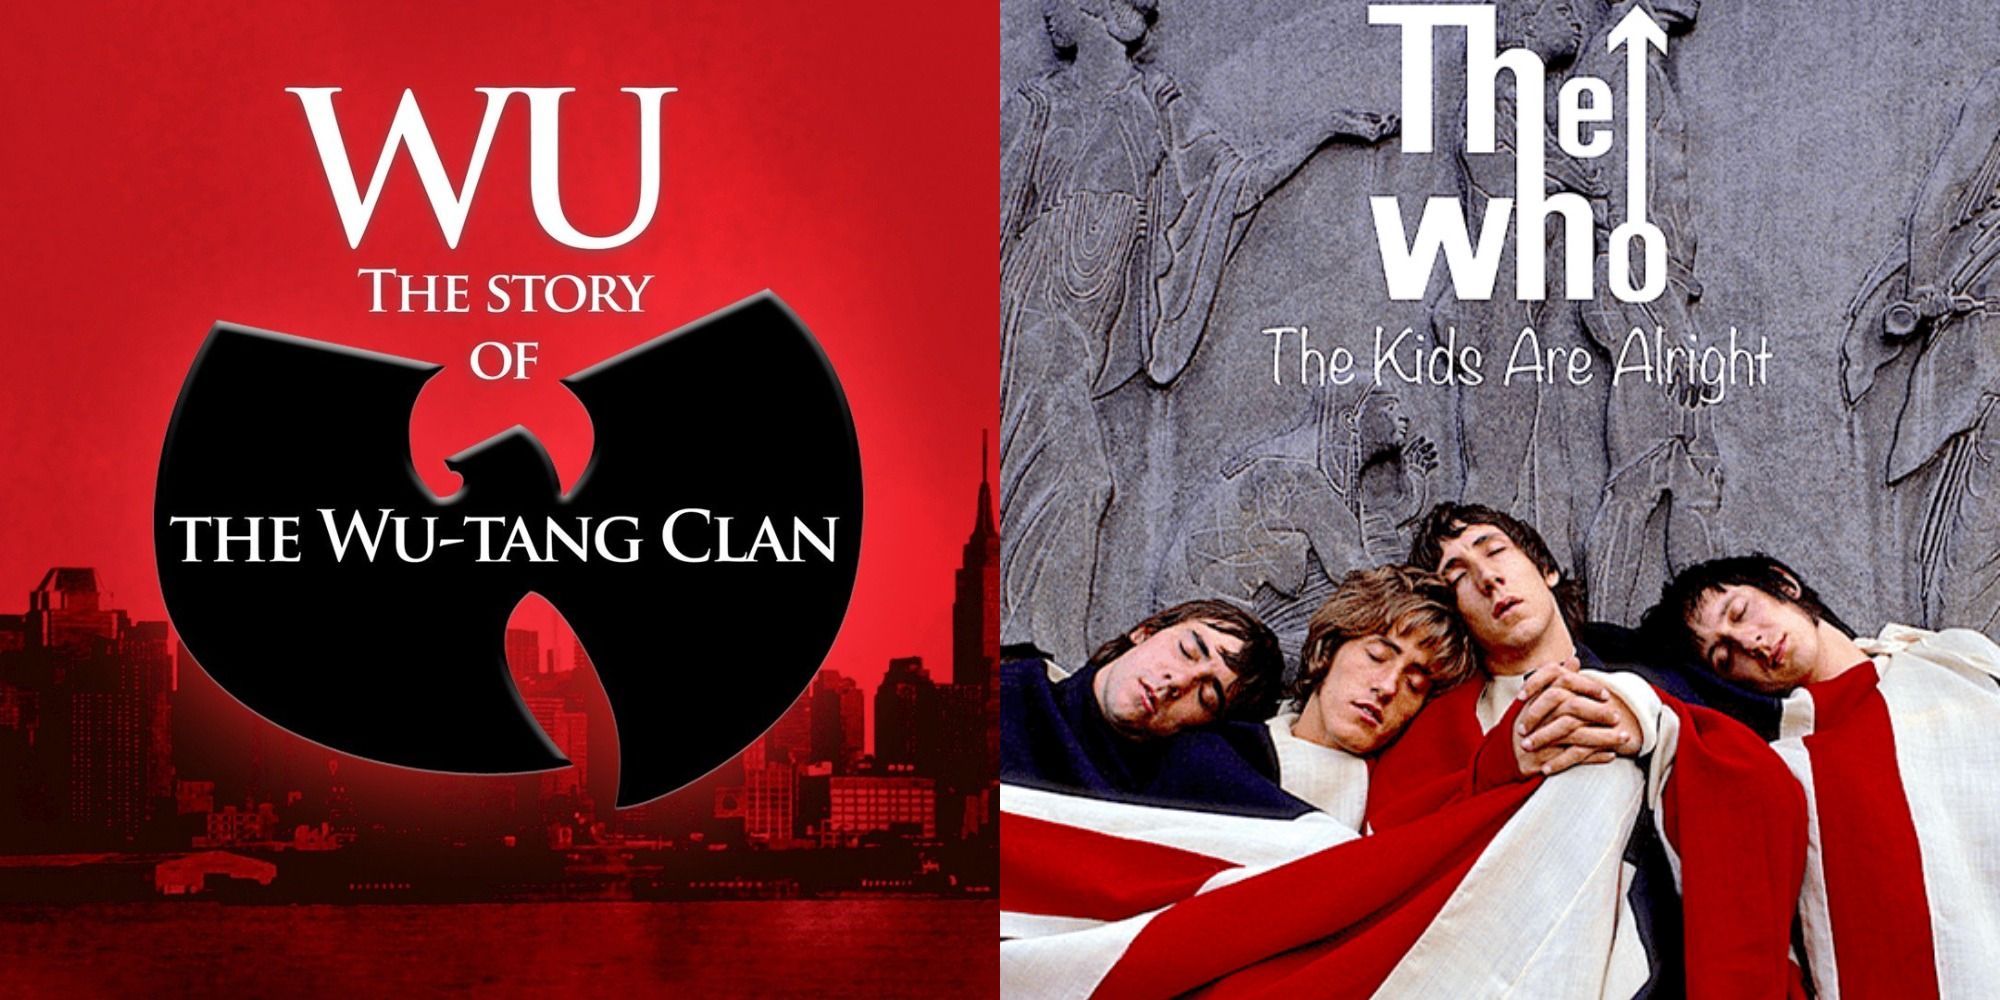 Split image showing the covers for the documentaries Wu The Story Of The Wu-Tang Clan and The Kids Are Alright